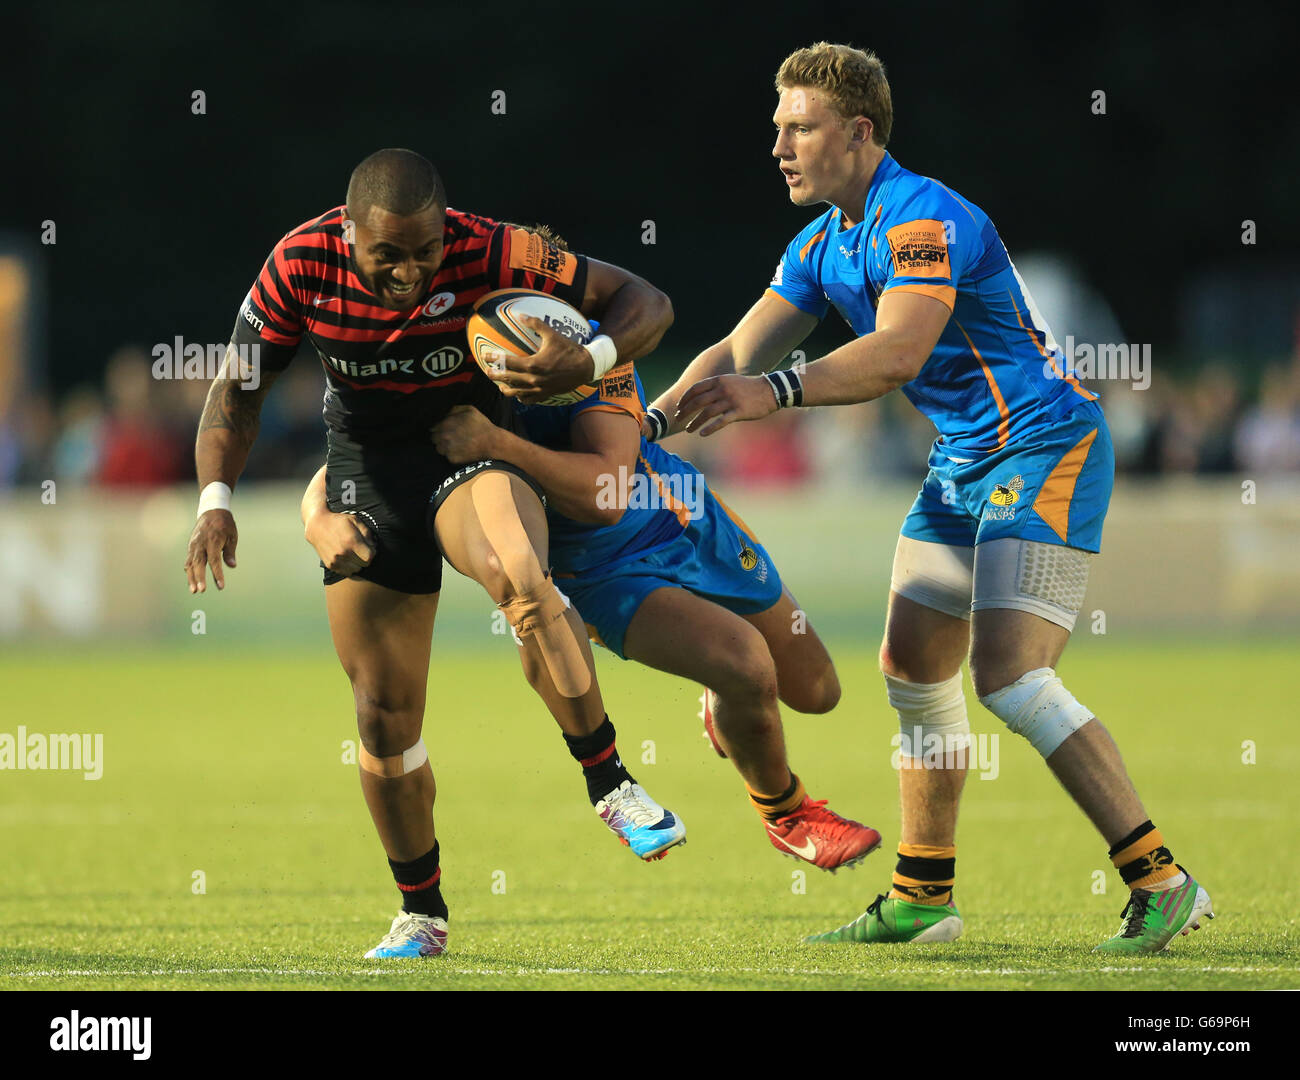 Saracens' Michael Tagicakibau is held by Wasps' Tom Howe during Group C match of the J.P. Morgan Asset Management Premiership Rugby 7's match at Allianz Park, London. Stock Photo